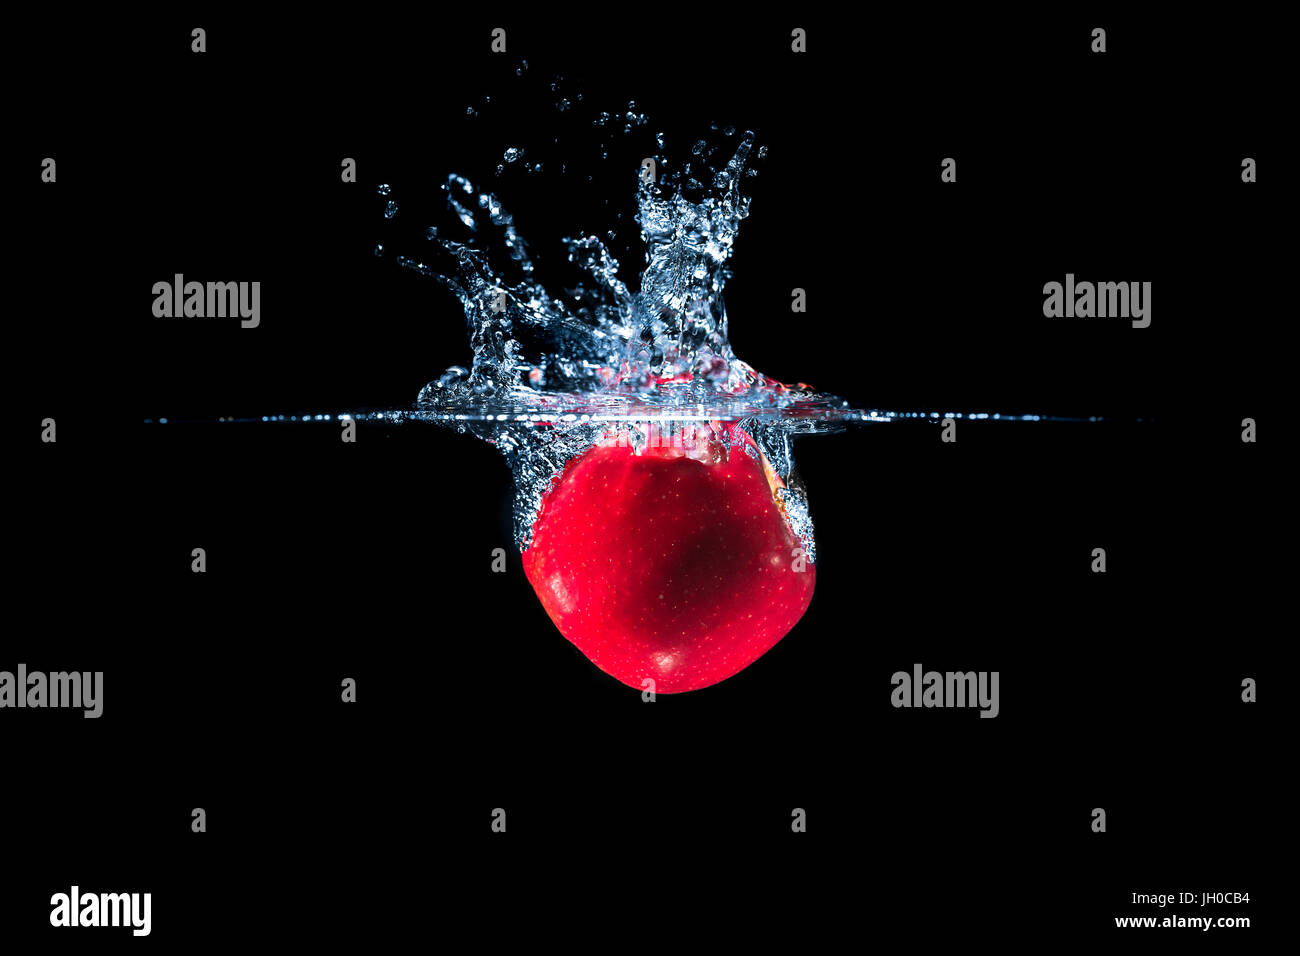 Red apple and water splash isolated on black background Stock Photo